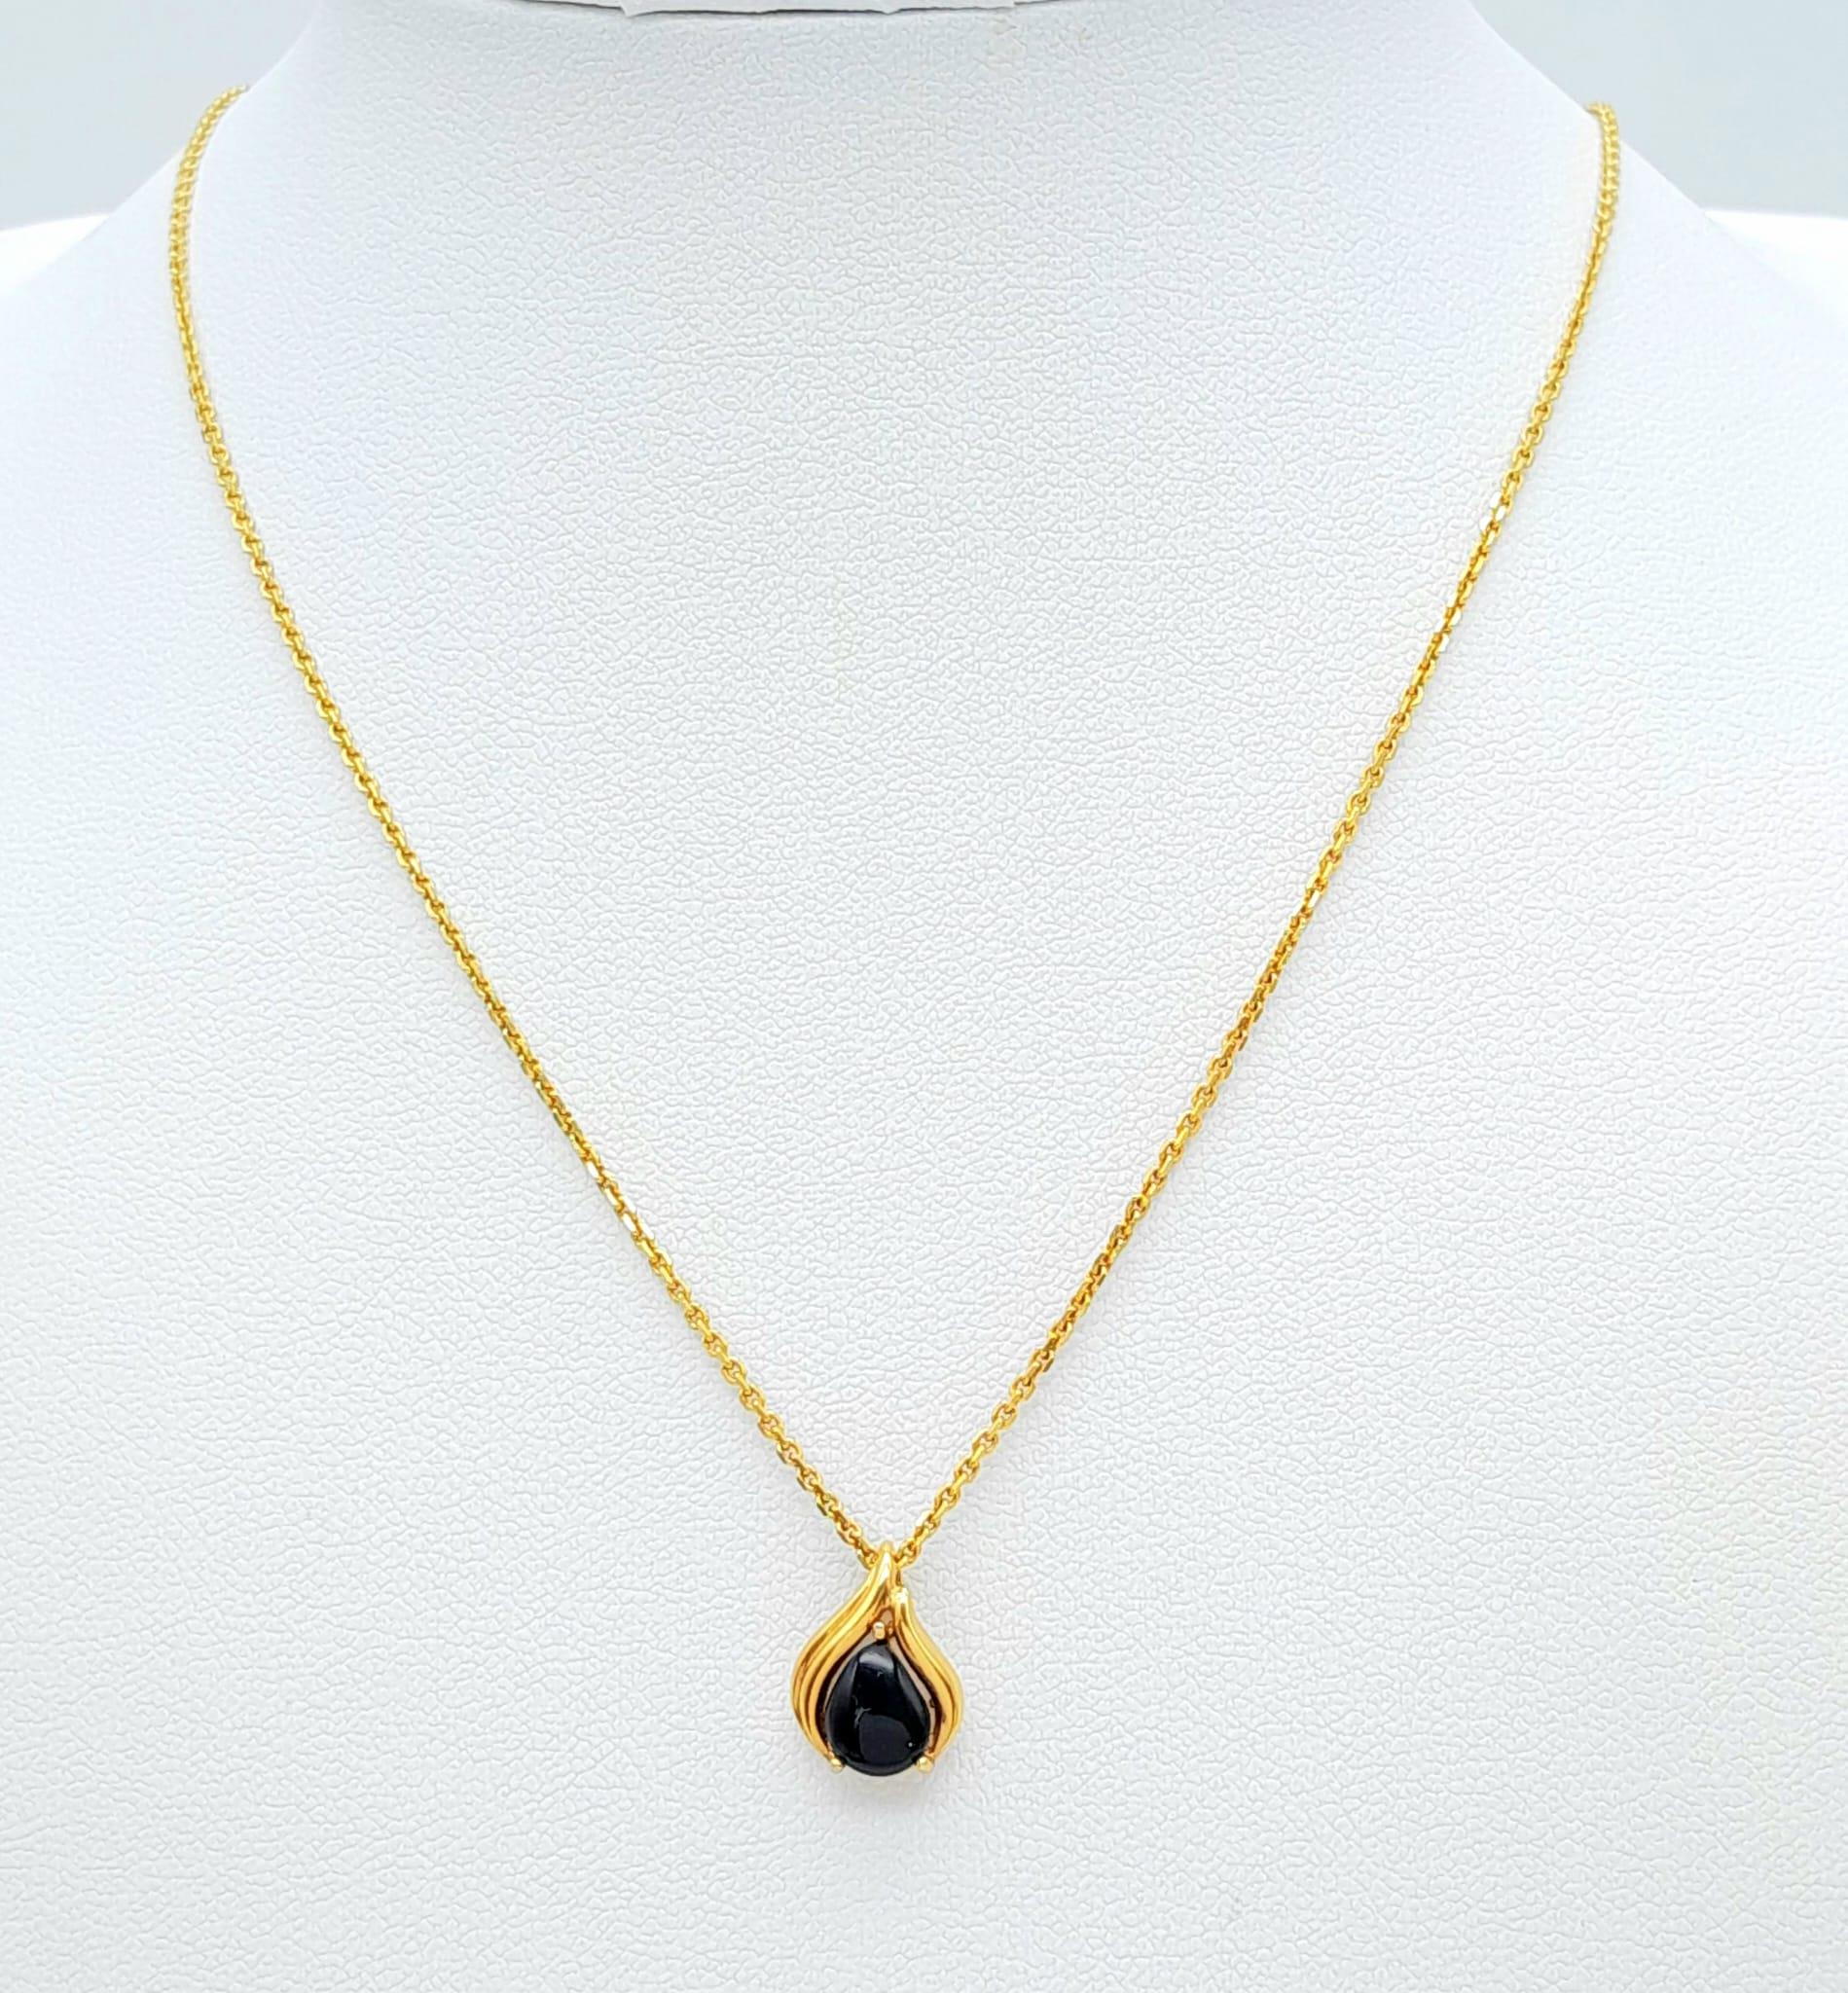 A 9 K yellow gold chain necklace with a black onyx pendant, chain length: 40 cm, total weight: 2.5